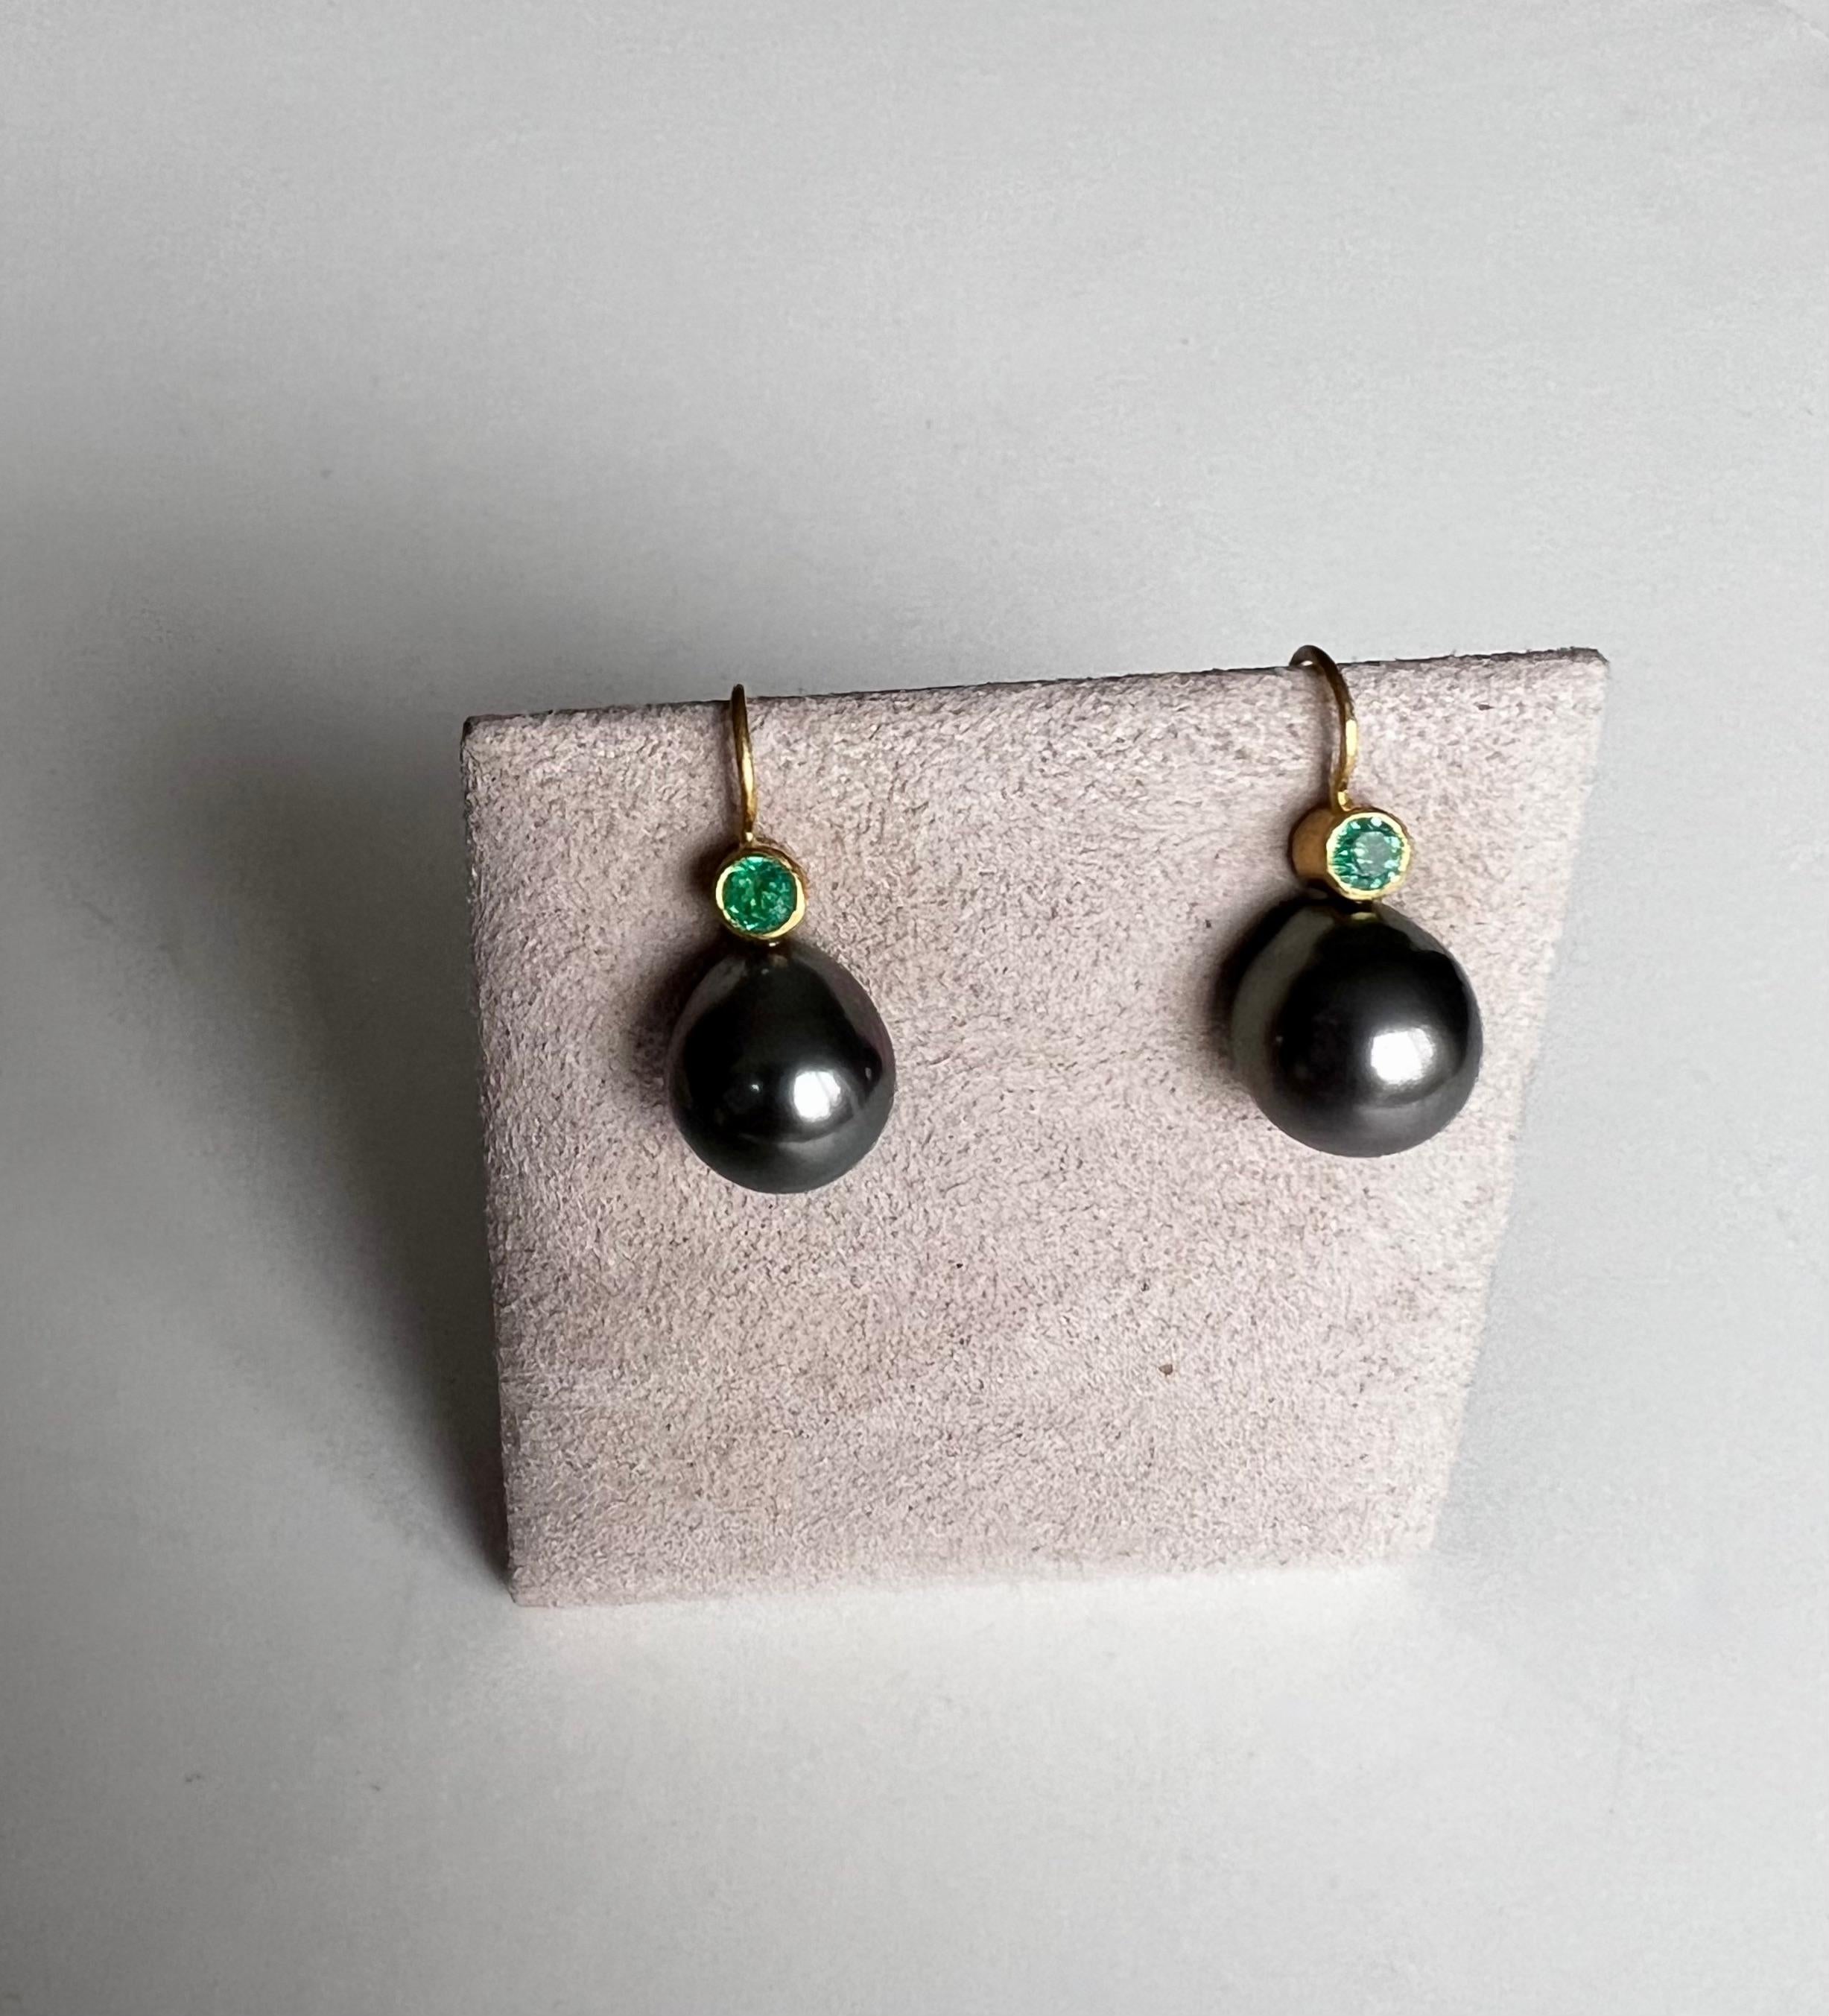 Beautiful grey Tahitian Pearls paired with vibrant Columbian Emeralds set in 22 Karat gold and 20 Karat earwires.
The Emeralds are 4 millimeter round and weigh .70ct  The Pearl is 12 millimeter at widest point.
The earrings hang 1